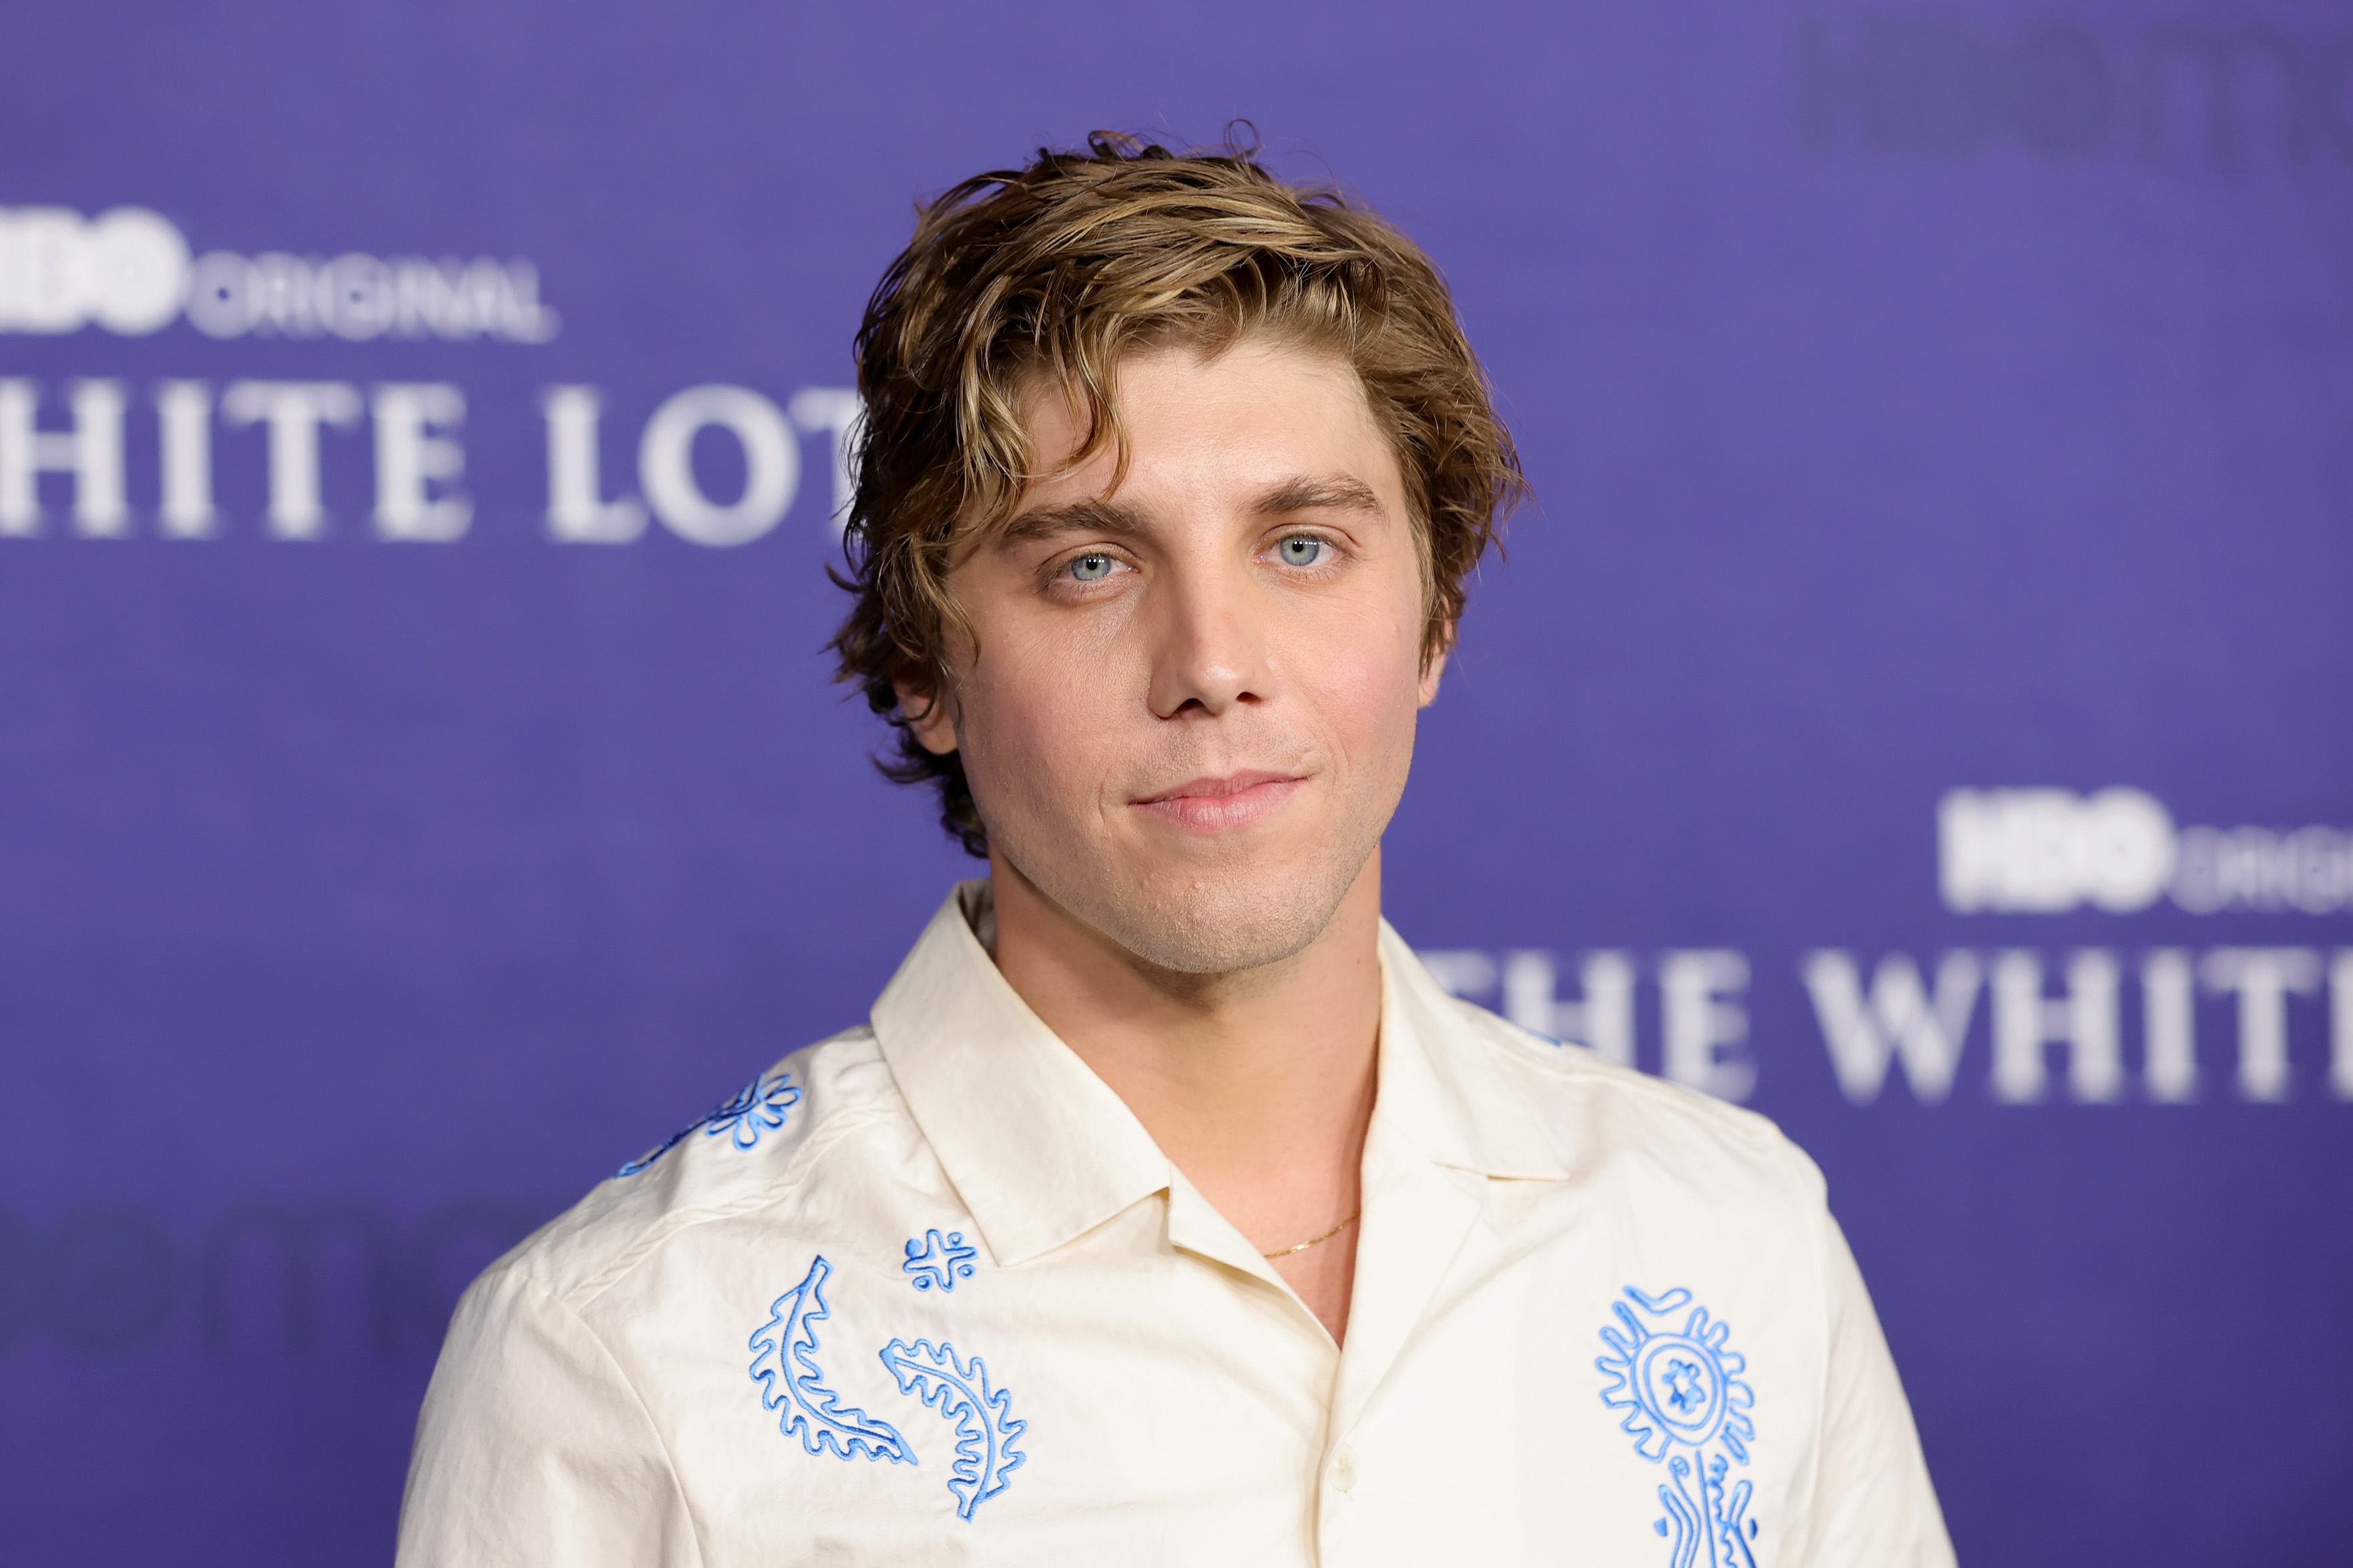 Lukas Gage attends the Los Angeles Season 2 Premiere of the HBO Original Series "The White Lotus" at Goya Studios on October 20, 2022, in Los Angeles, California. | Source: Getty Images